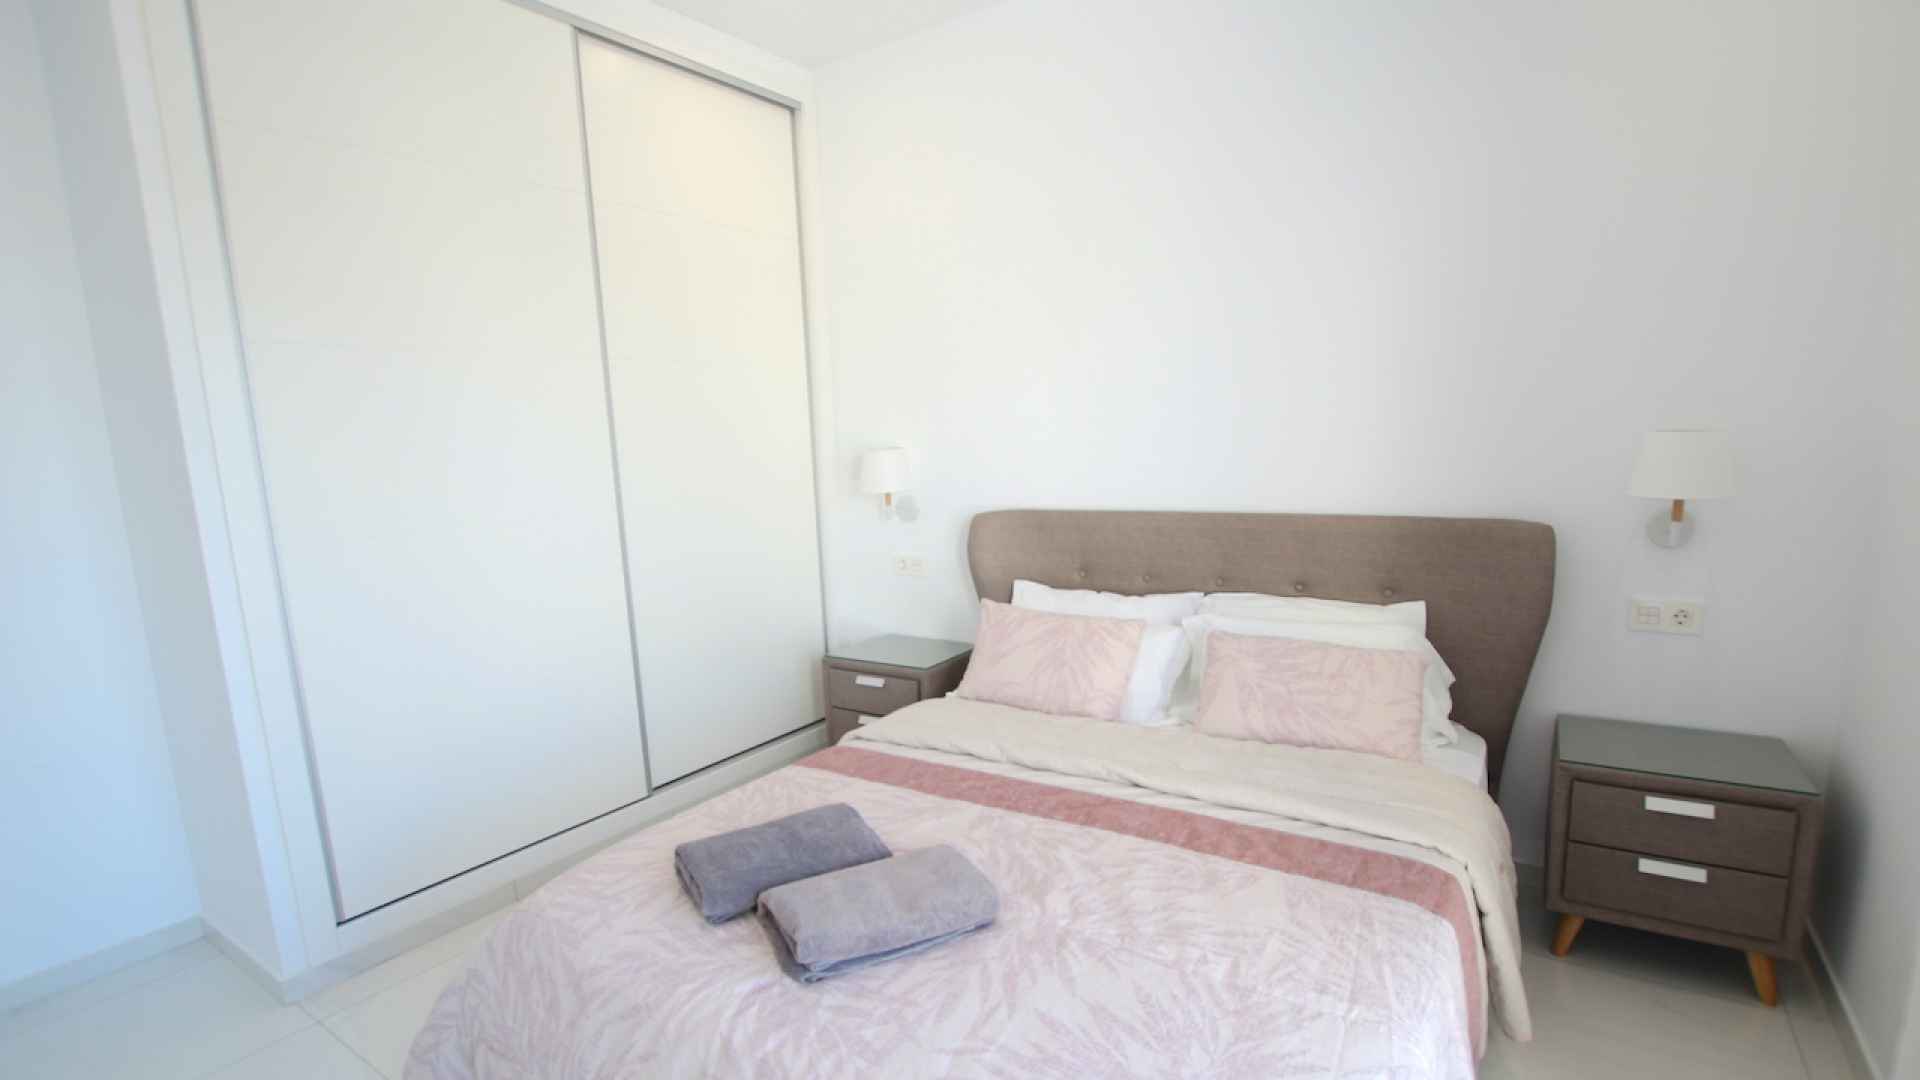 48308_stunning_3_bedroom_villa_in_a_highly_sough_after_location_201223102904_img_5100